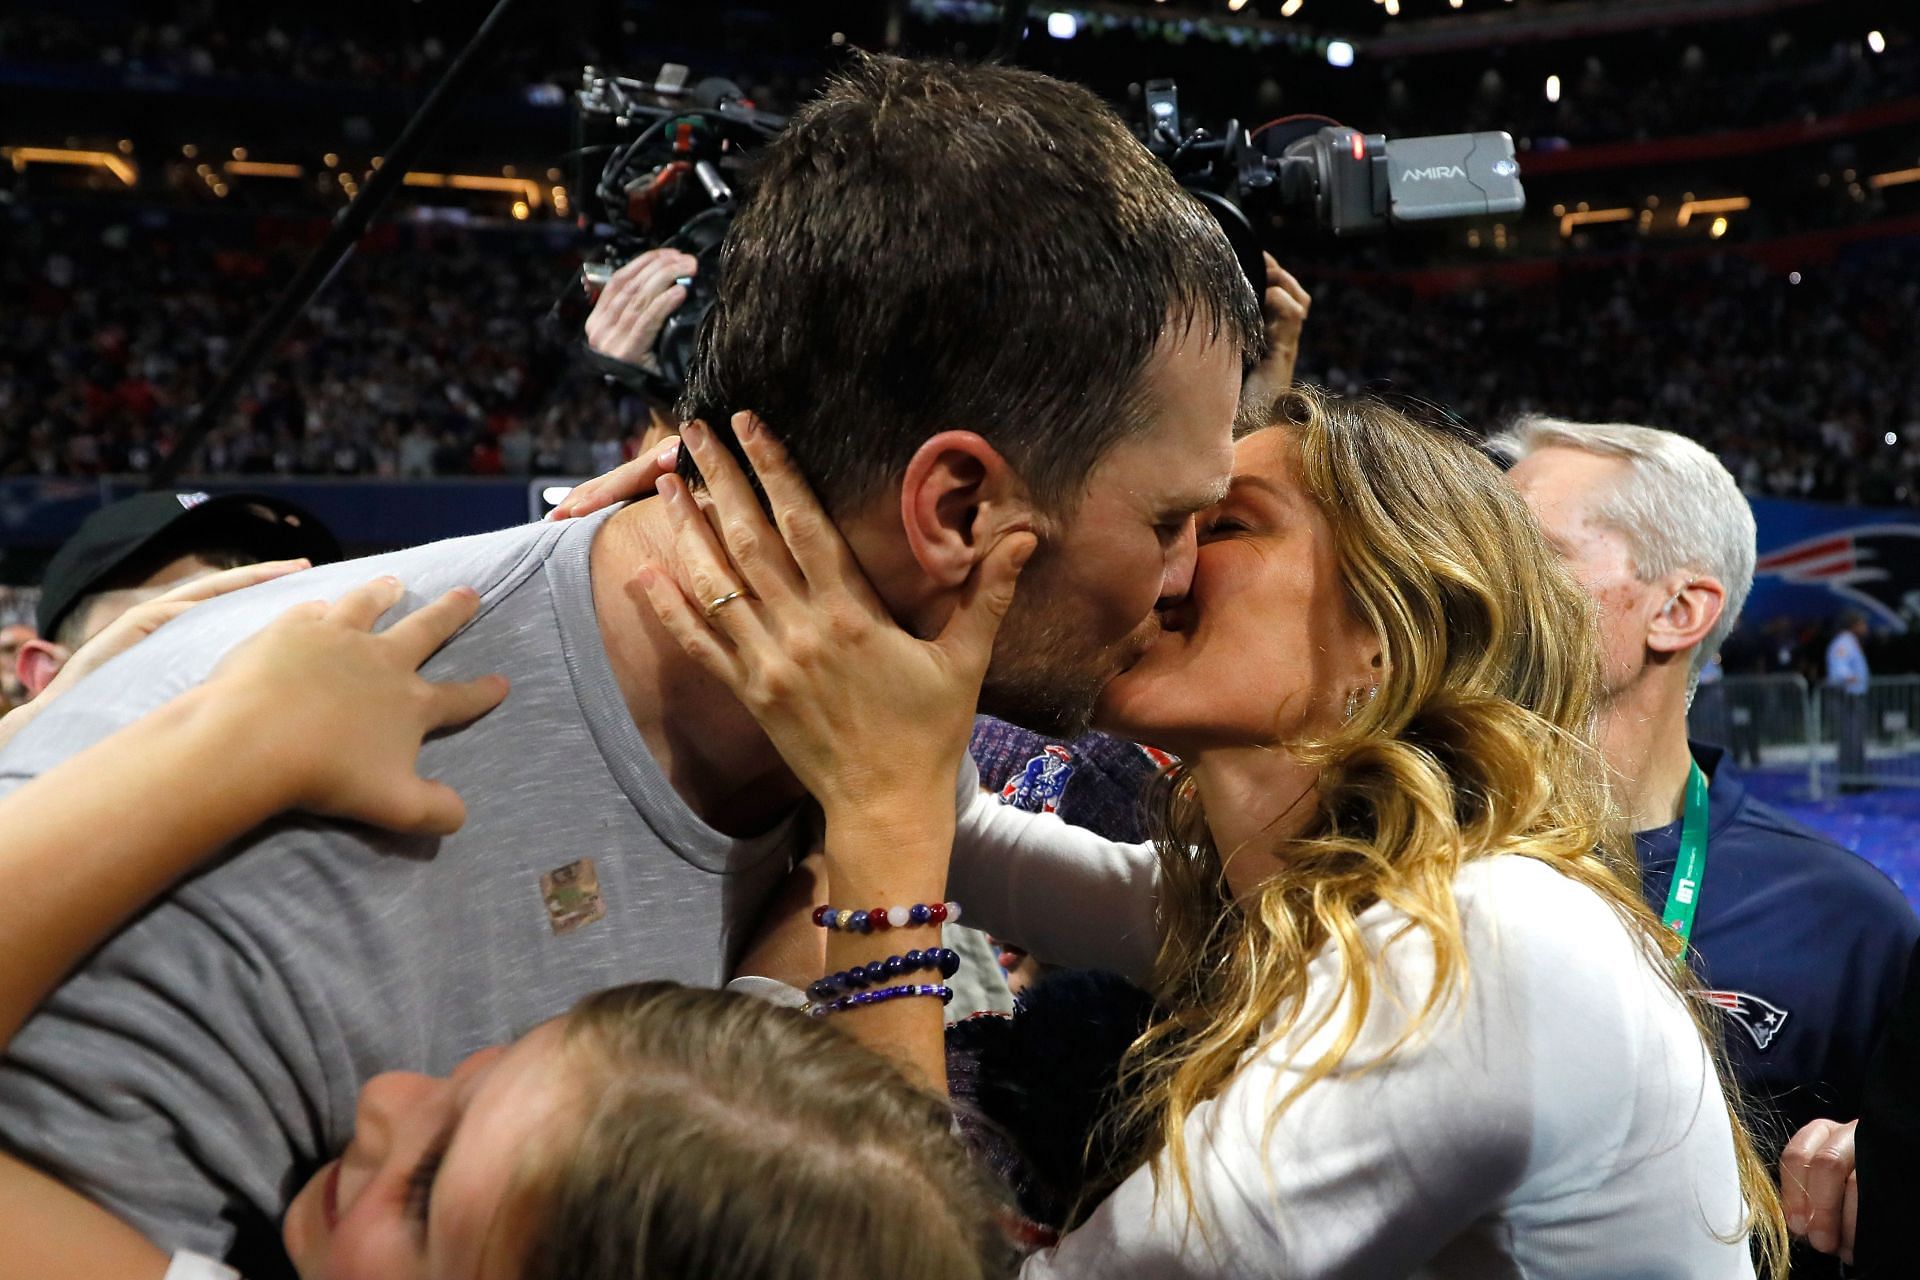 Gisele and Brady after he won his final Super Bowl with the Patriots